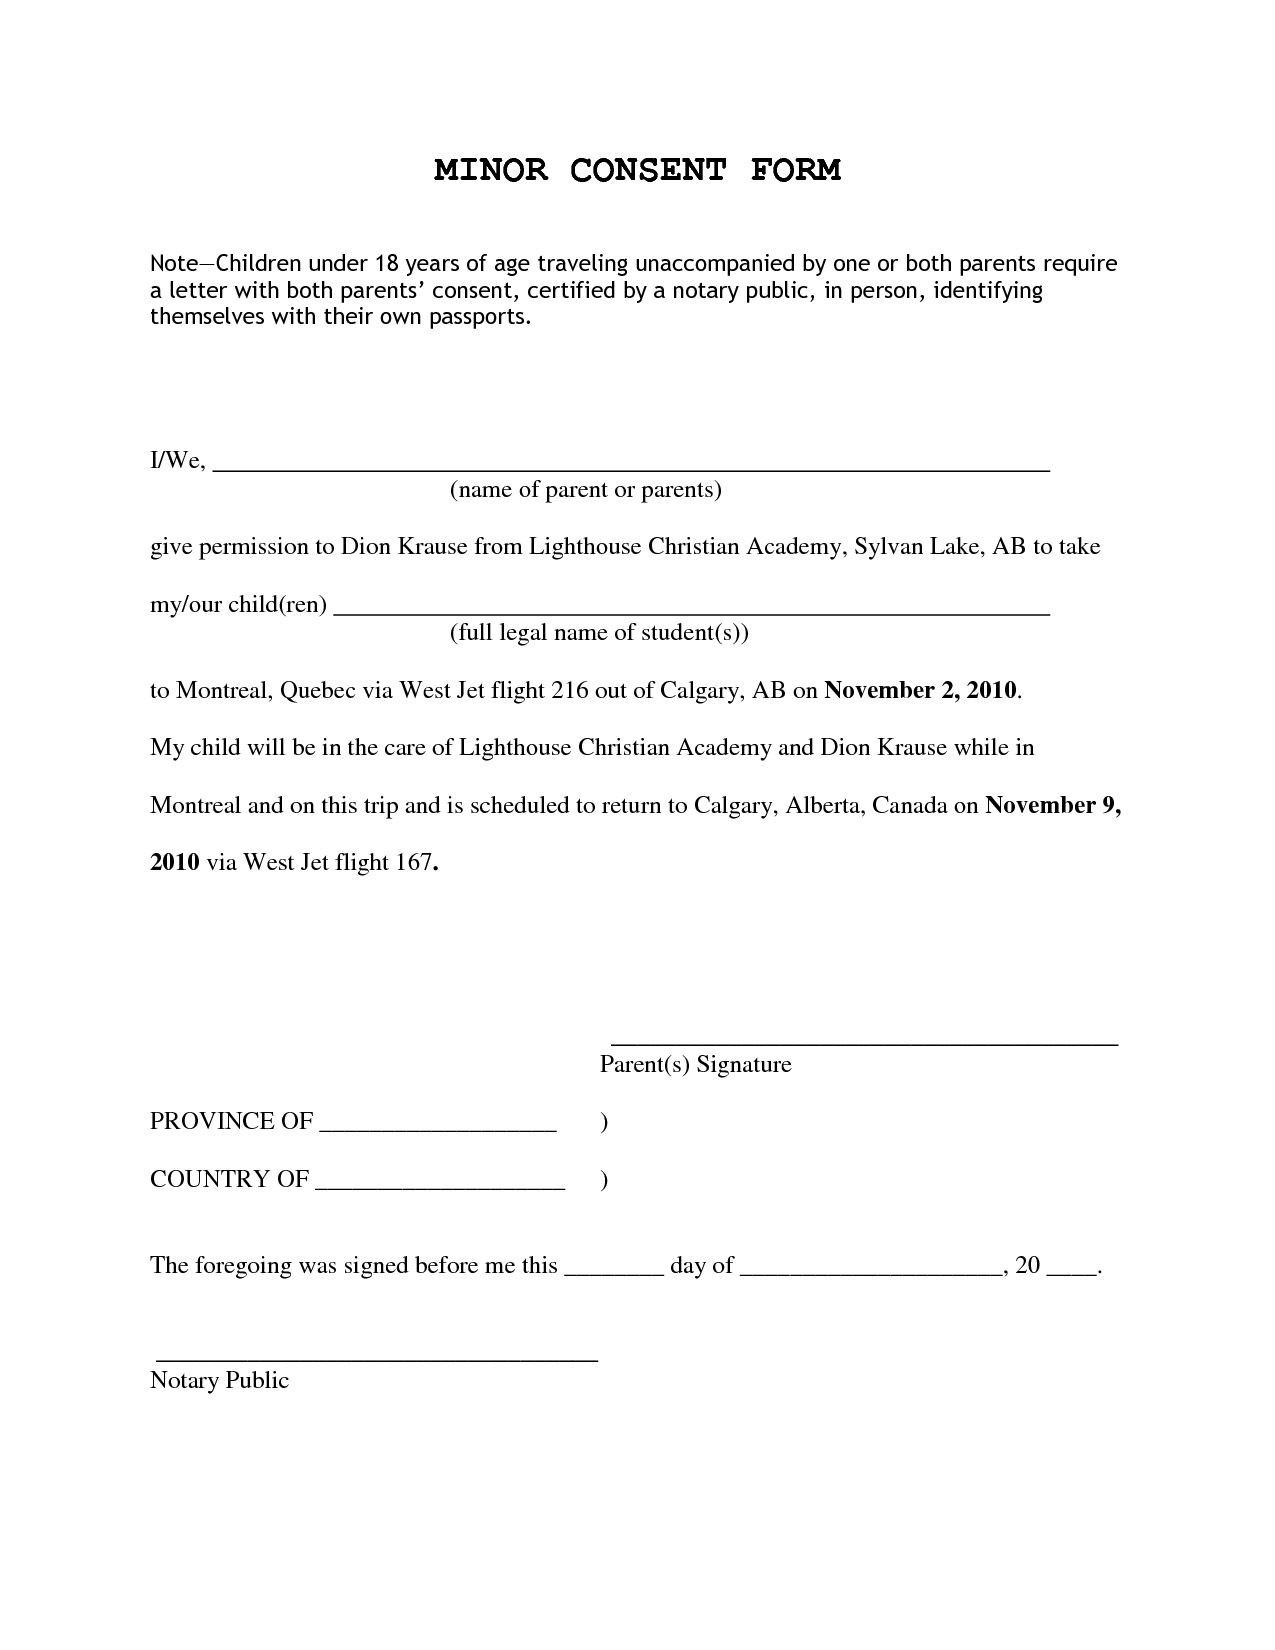 Notarized Letter Template for Child Travel - Child Support Letter Sampleparents Support Letter format Copy 17